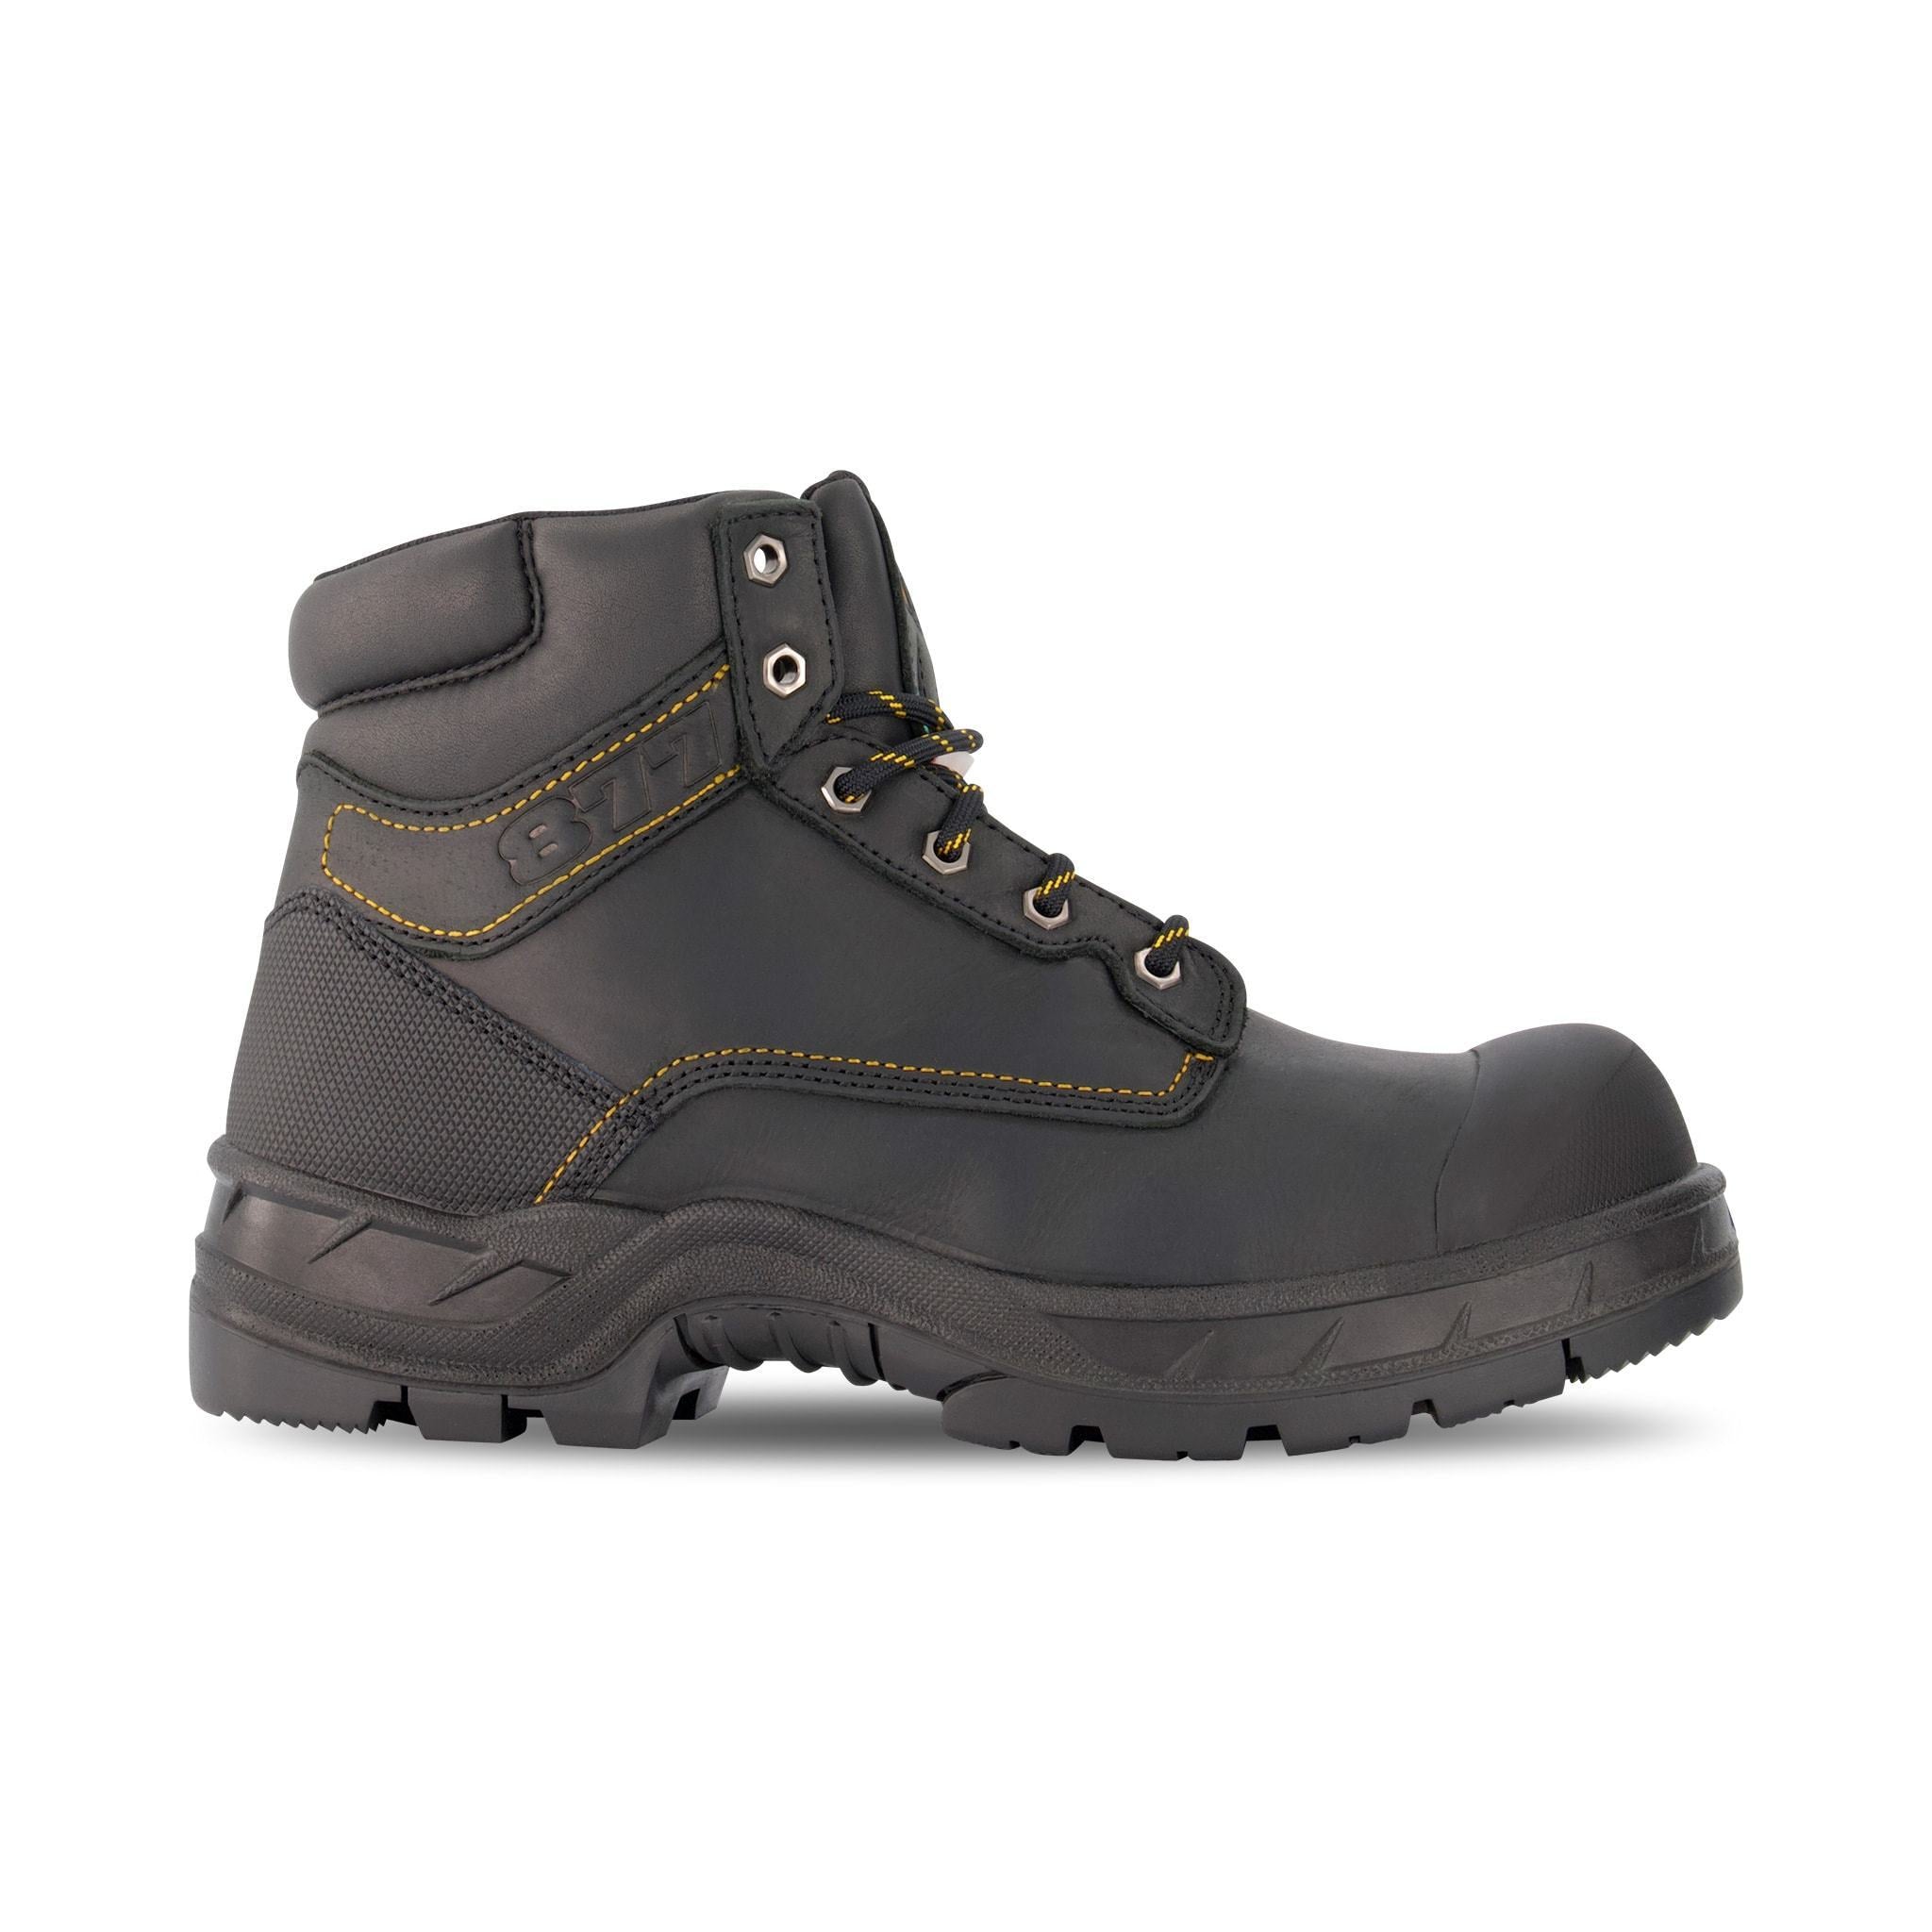 Men's 877 6 Inch Work Boots Steel Toe Plated & Breathable - Black